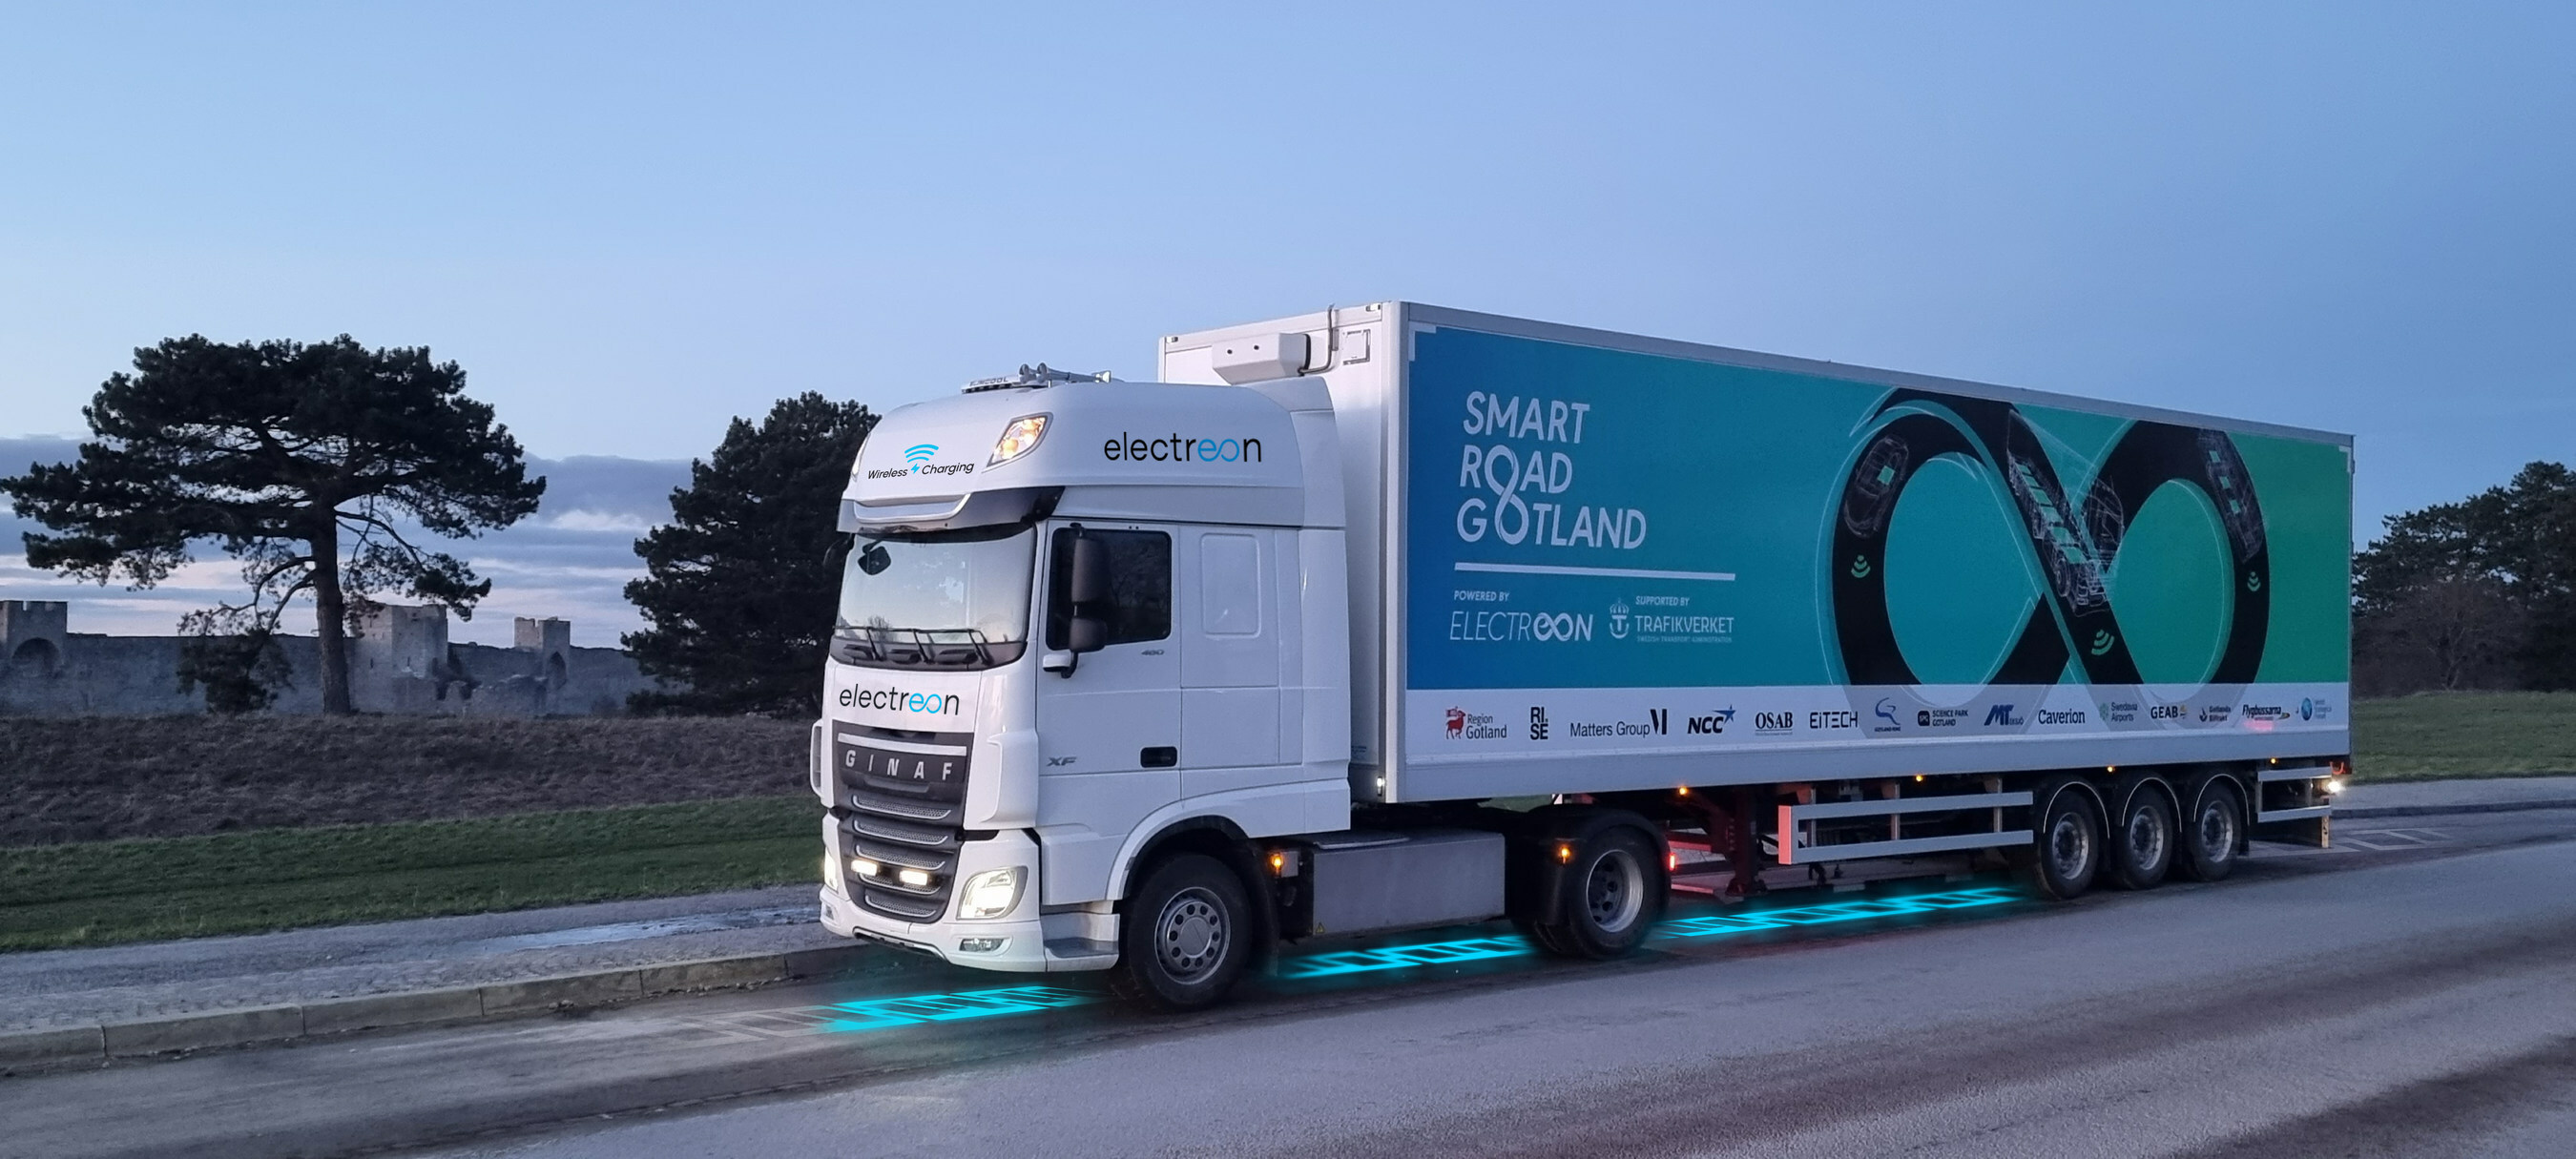 A Ginaf E–truck wirelessly charging on Electreon's Smartroad in Gotland, Sweden, the world’s first electric road for trucks and buses. Image: Electreon